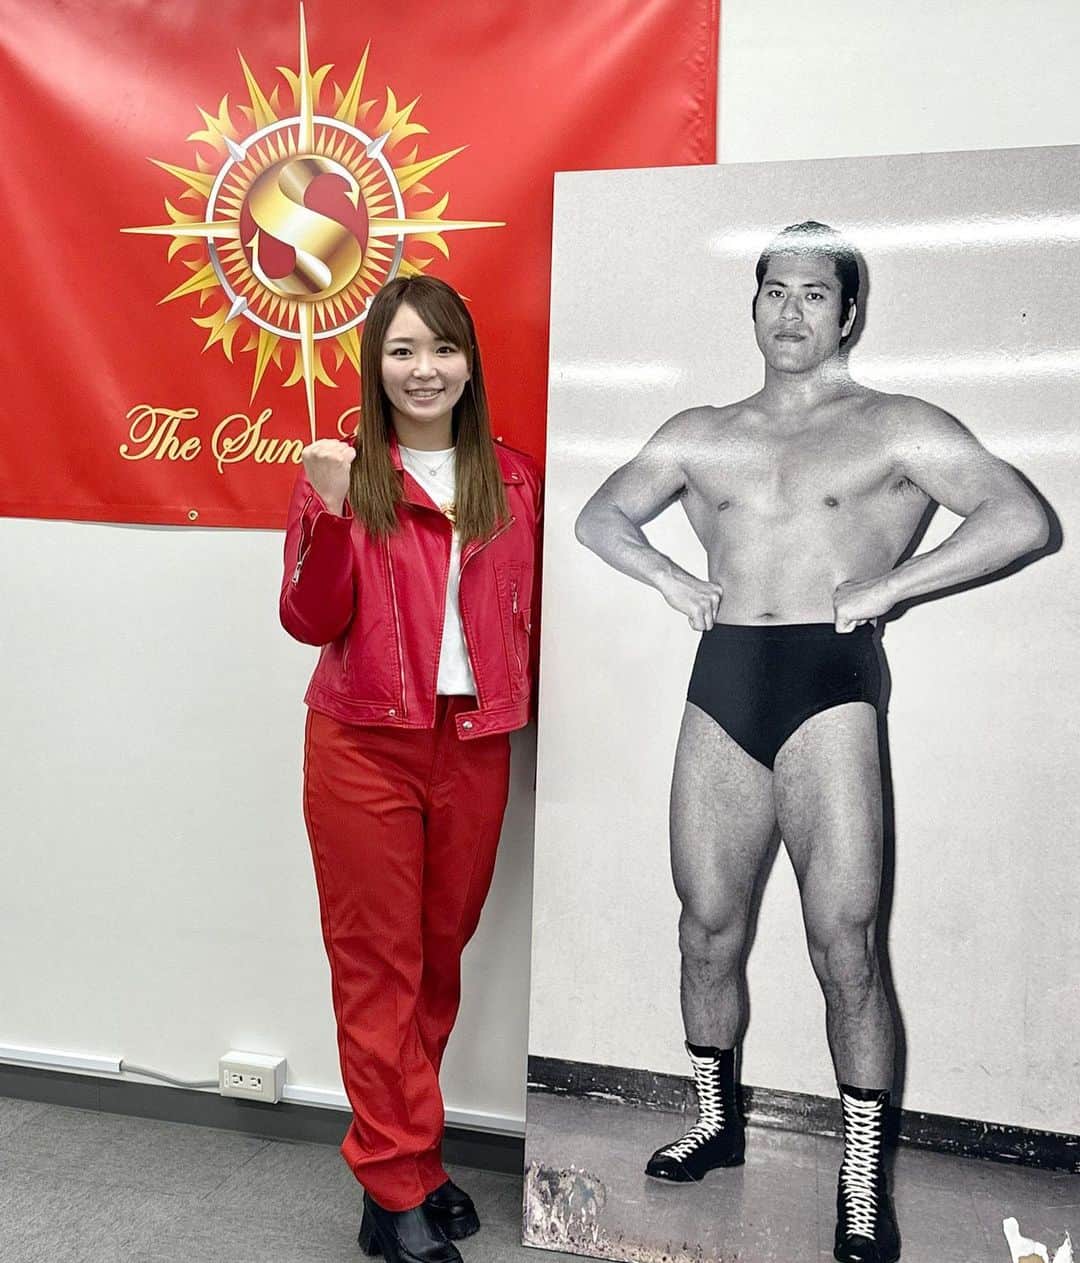 Sareeeのインスタグラム：「I will show the world the pro wrestling I have always believed in and love.  Sareee-ISM May 16th Chapter 1   I really appreciate the support from my fans from around the world.  I want my fans to watch it so it will be available worldwide live  Will have more information ready soon. Please come watch it. 🌞  Sareee-ISM Chapter 1  Shinjuku Face  May 16th, 2023  6 pm Doors open  7 pm event starts   1. Riko Kaiju (Seadlinnng) vs  Yurika Oka (Sendai Girls)  10 minutes time limit   2. Akari (Pure-J) &  Arisa Nakajima (Seadlinnng) vs Ibuki Hoshi (Ice Ribbon) &  Miyuki Takase (Freelance)  20 minutes time limit   3. Jaguar Yokota (Diana) &  Nanae Takahashi (Freelance) vs Kaoru Ito (Ito Dojo) & X  30 minutes time limit   4. Main Event  Sareee vs  Chihiro Hashimoto (Sendai Girls)  30 minutes time limit  #SareeeISM」